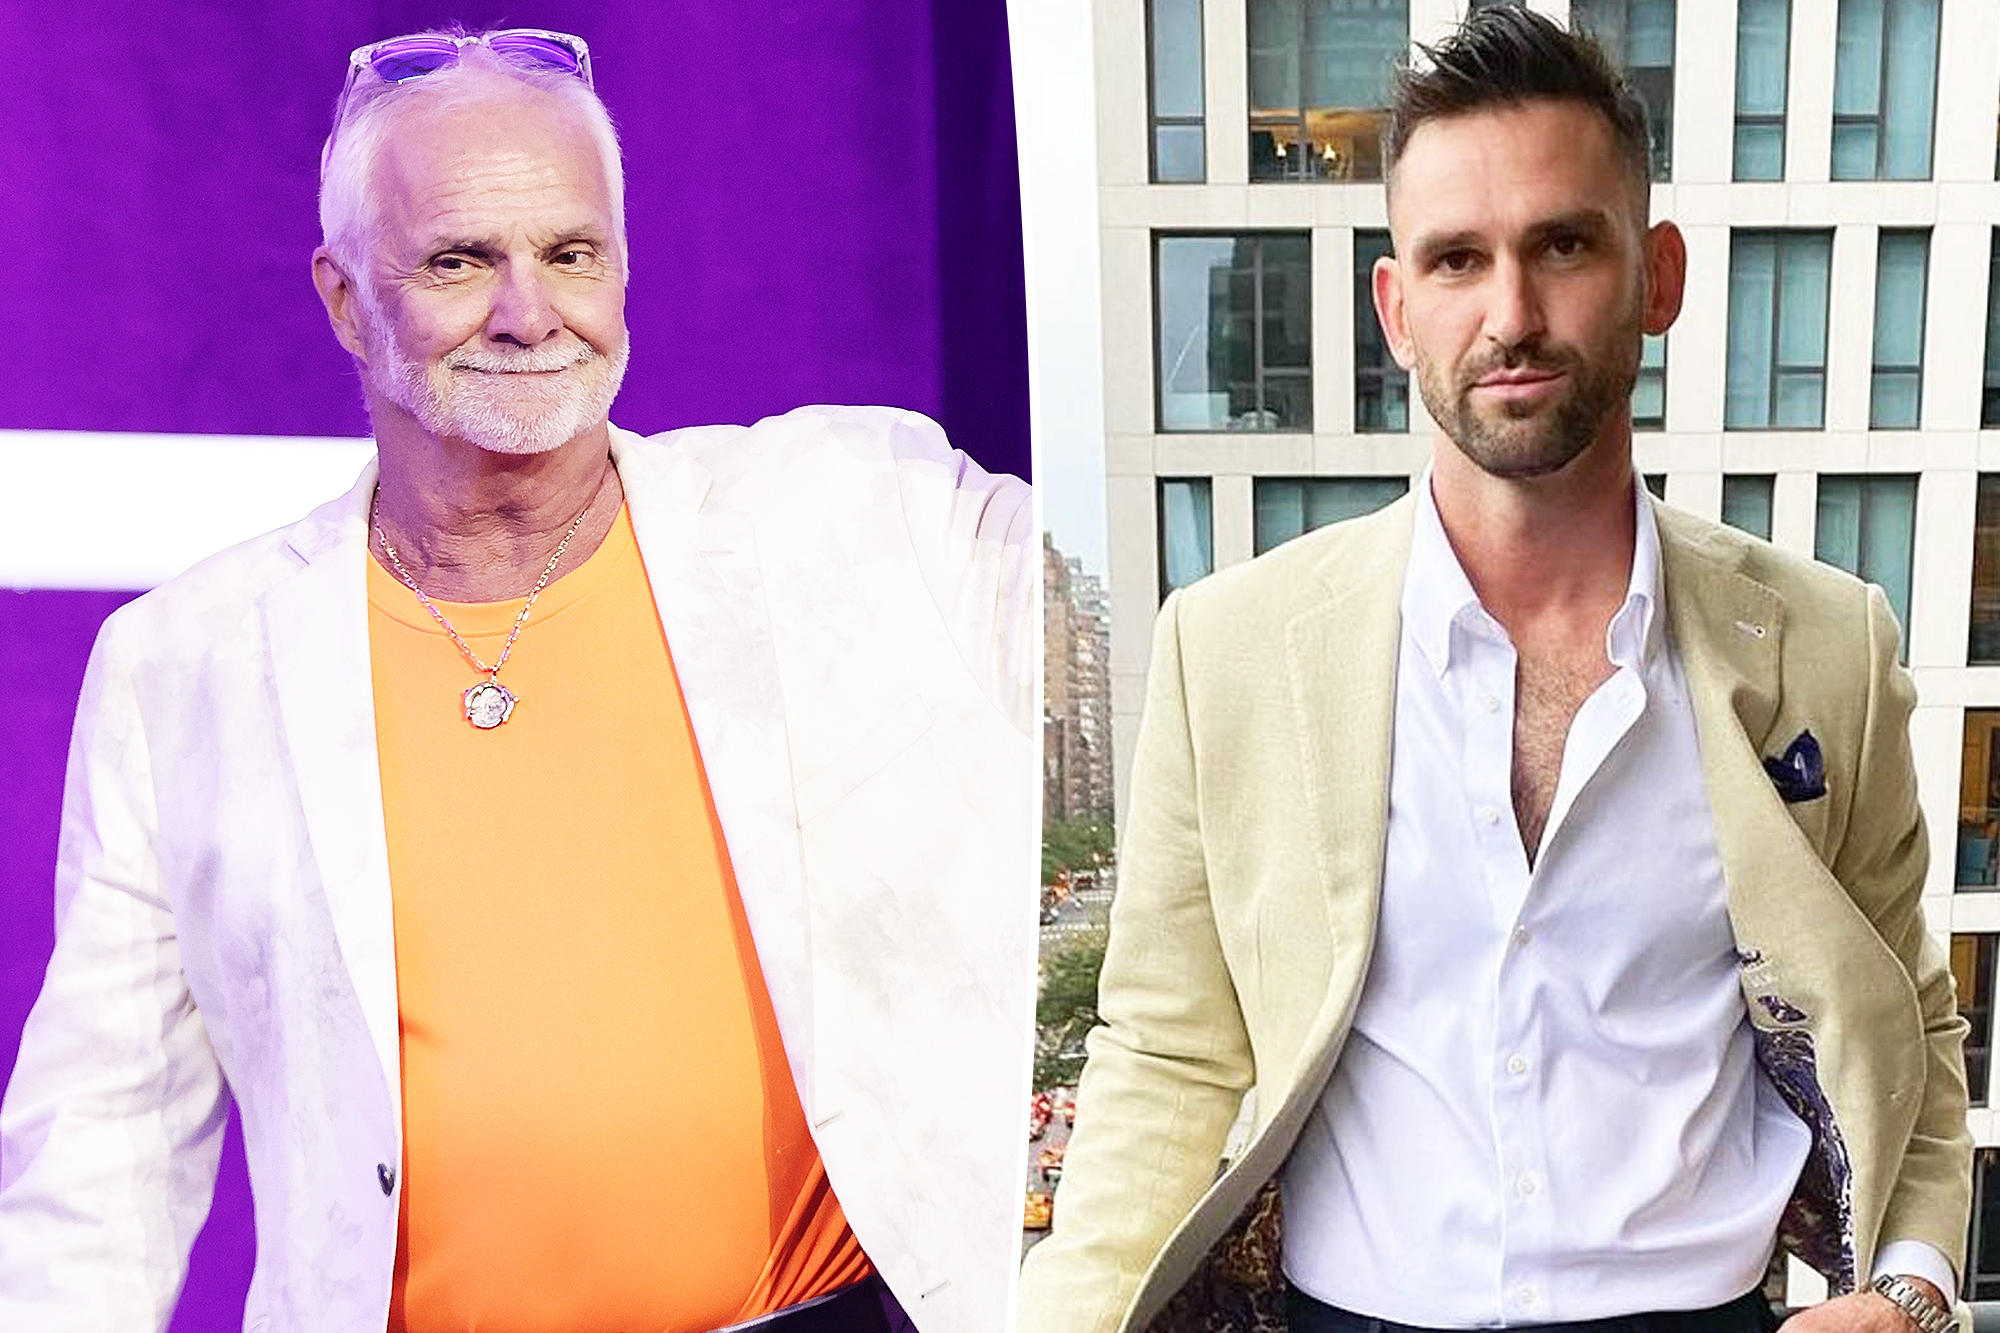 Captain Lee Rosbach Opens Up About the End of His Friendship with Carl Radke